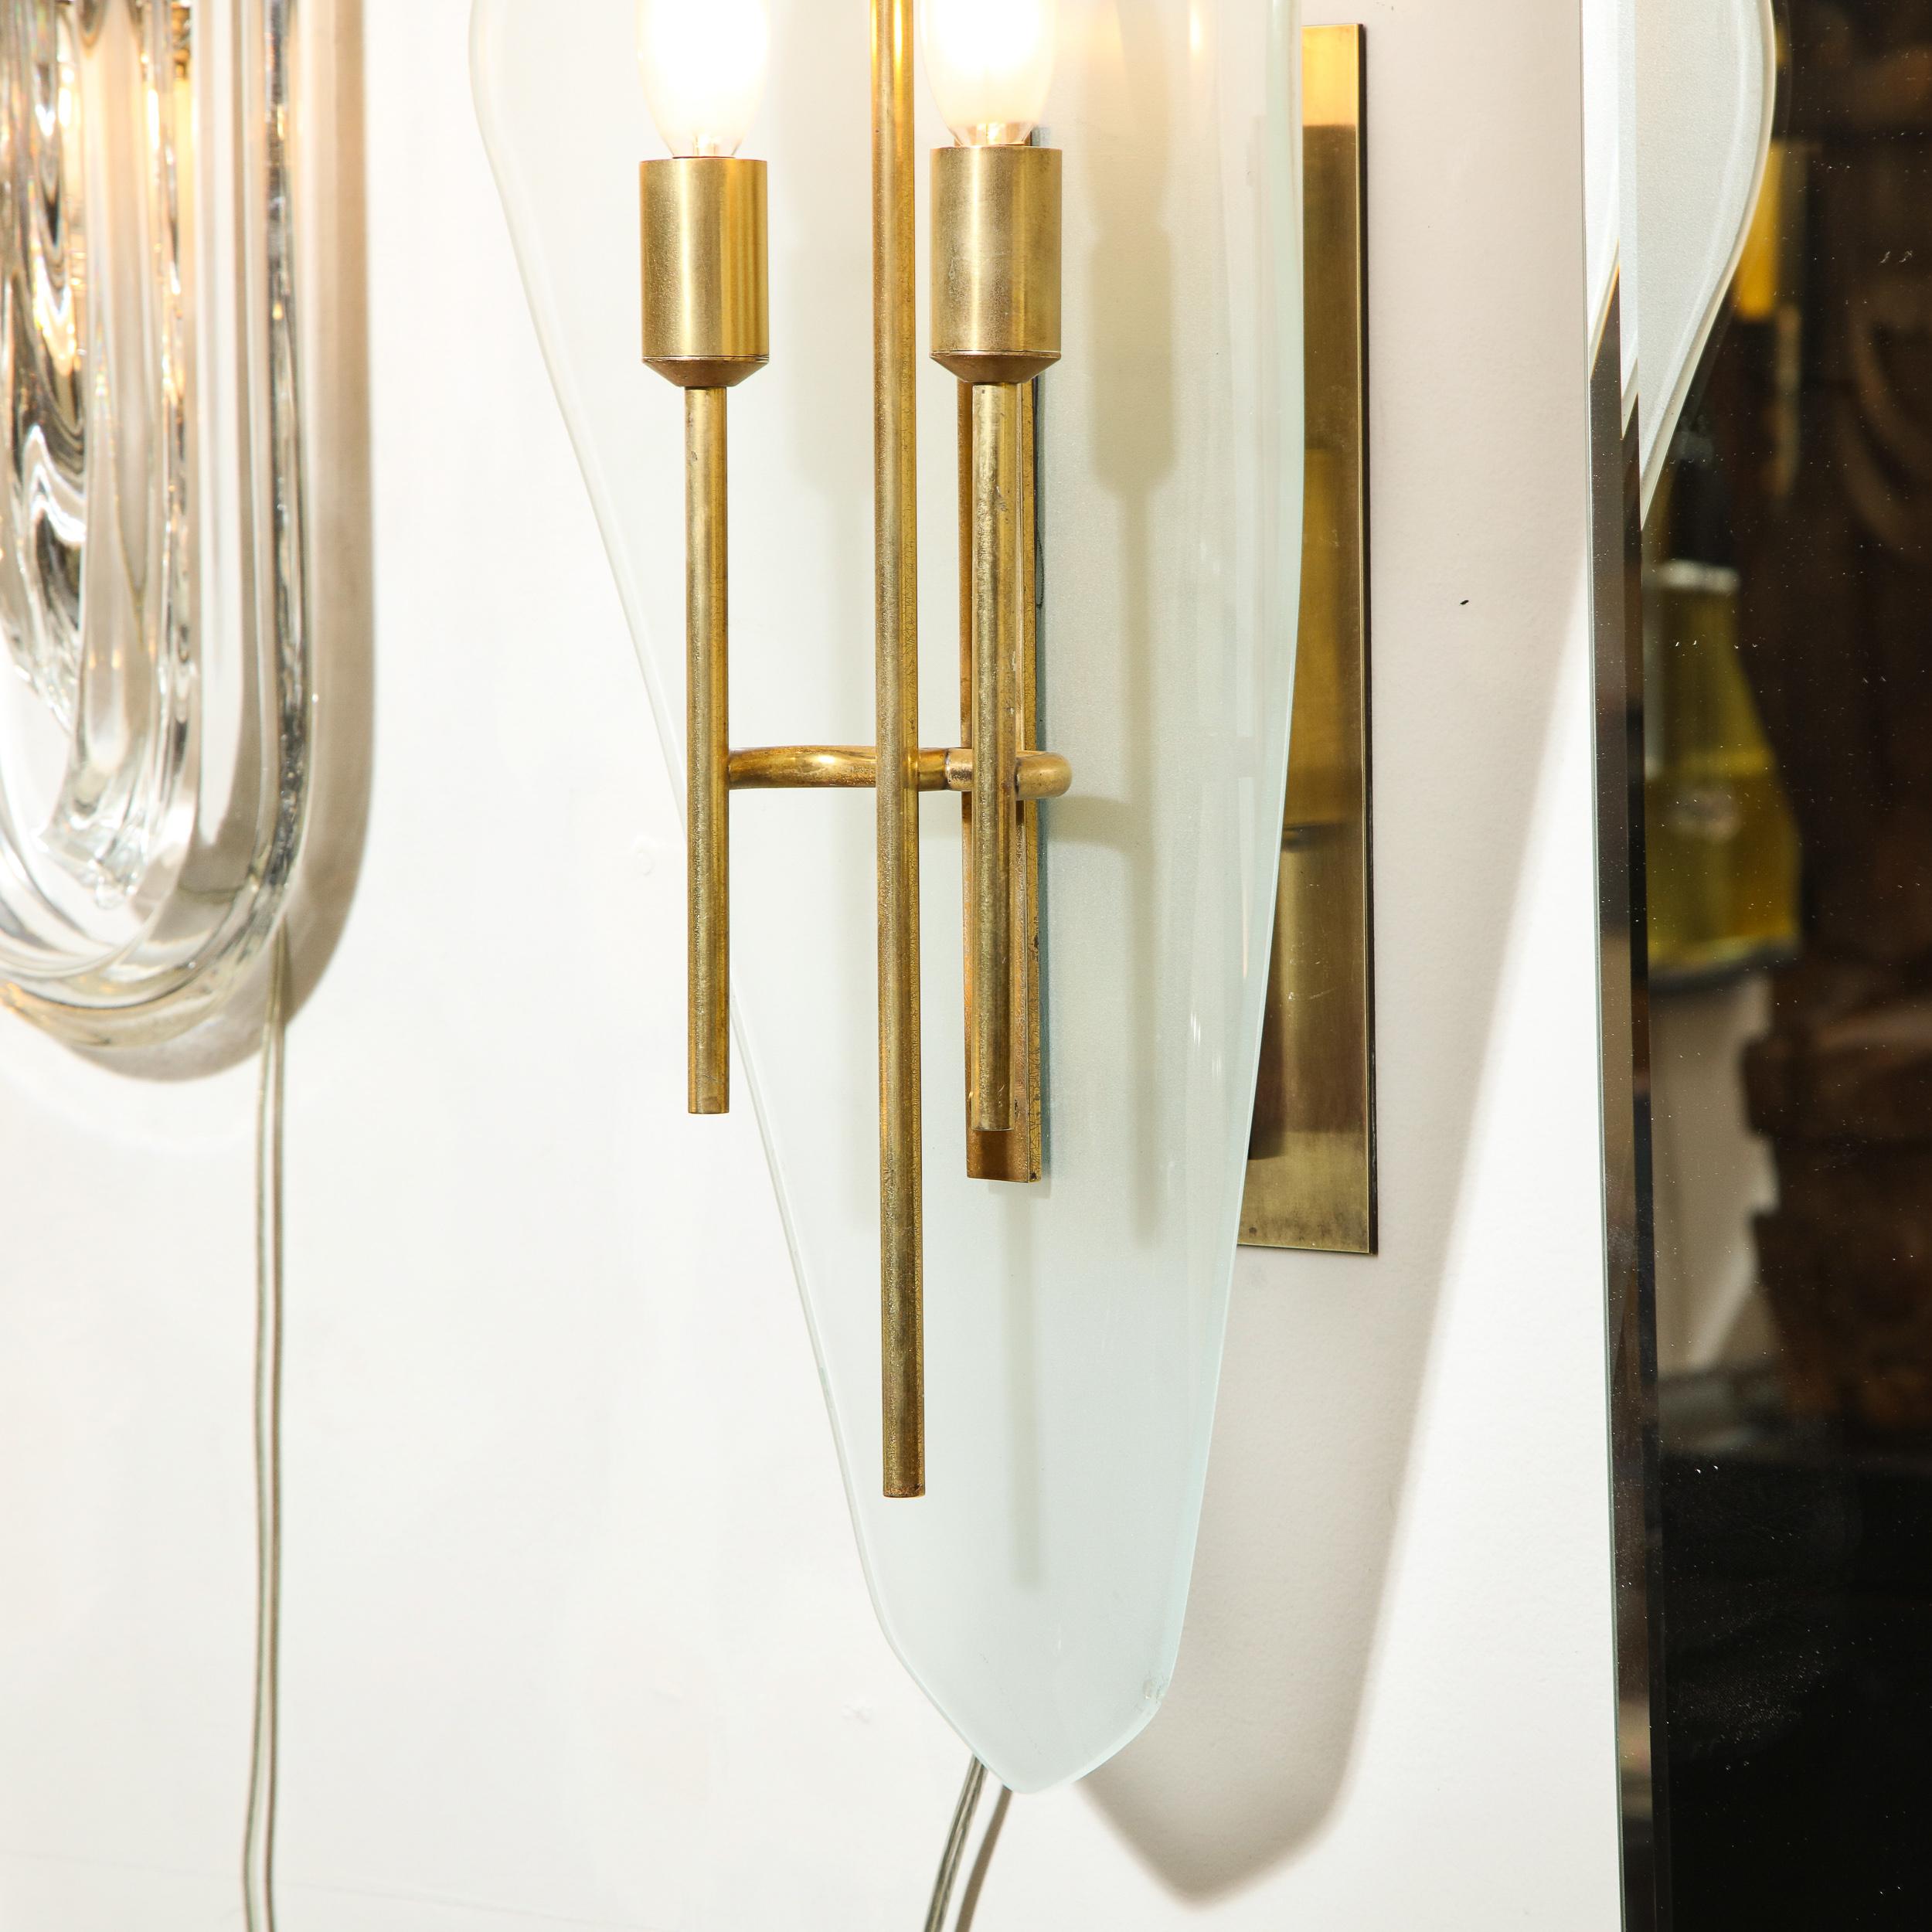 Pair of Mid-Century Modern Diamond Glass Sconces w/ Brass Fittings by Gio Ponti For Sale 1